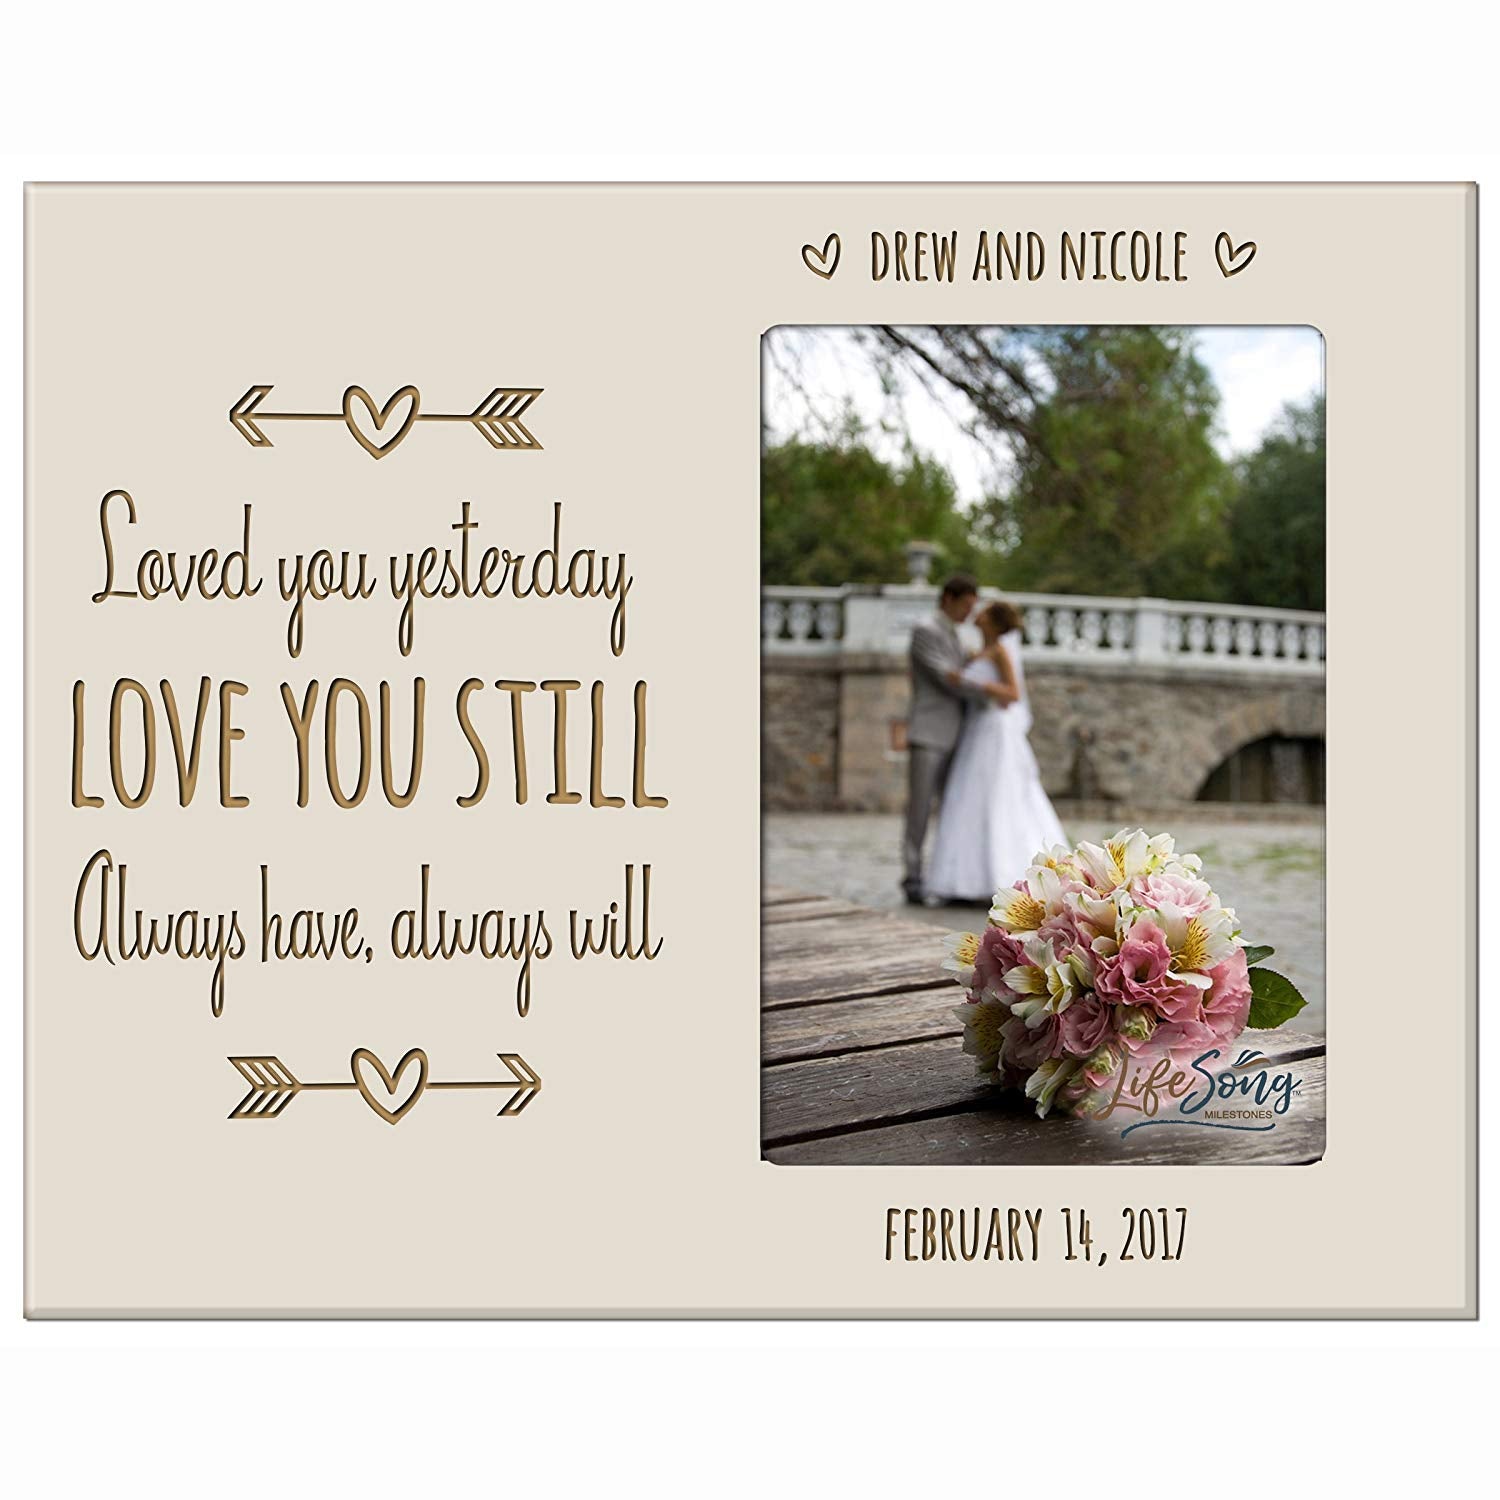 Personalized Valentine's Day Photo Frame - Love You Still - LifeSong Milestones